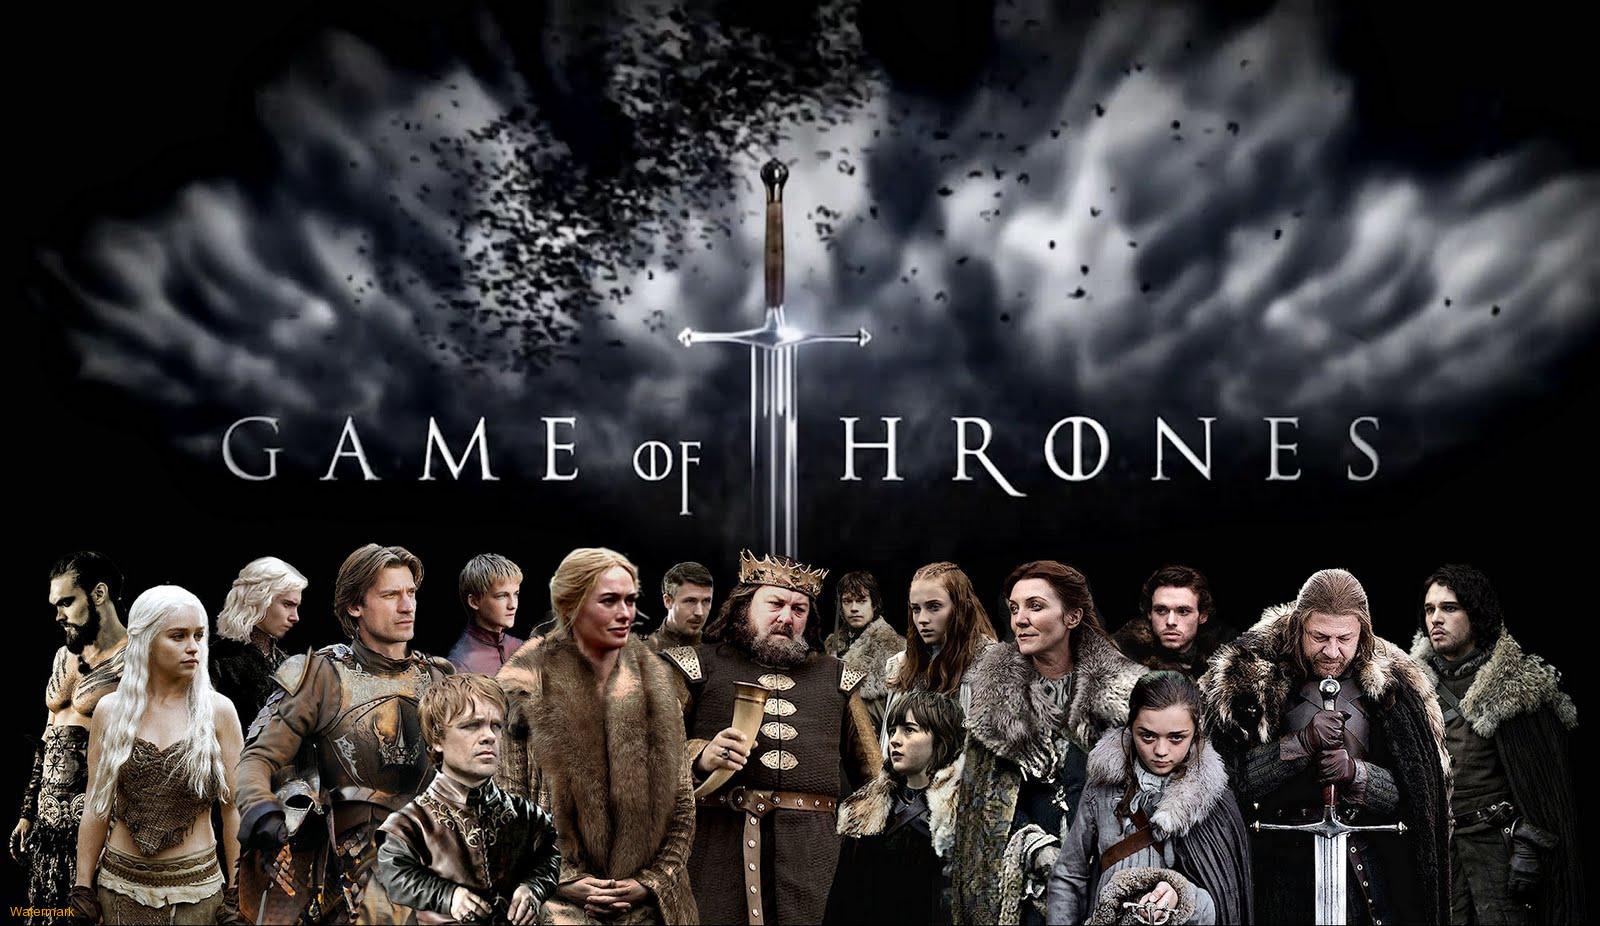 You win or you die: who is playing the ‘game of thrones’ the best?